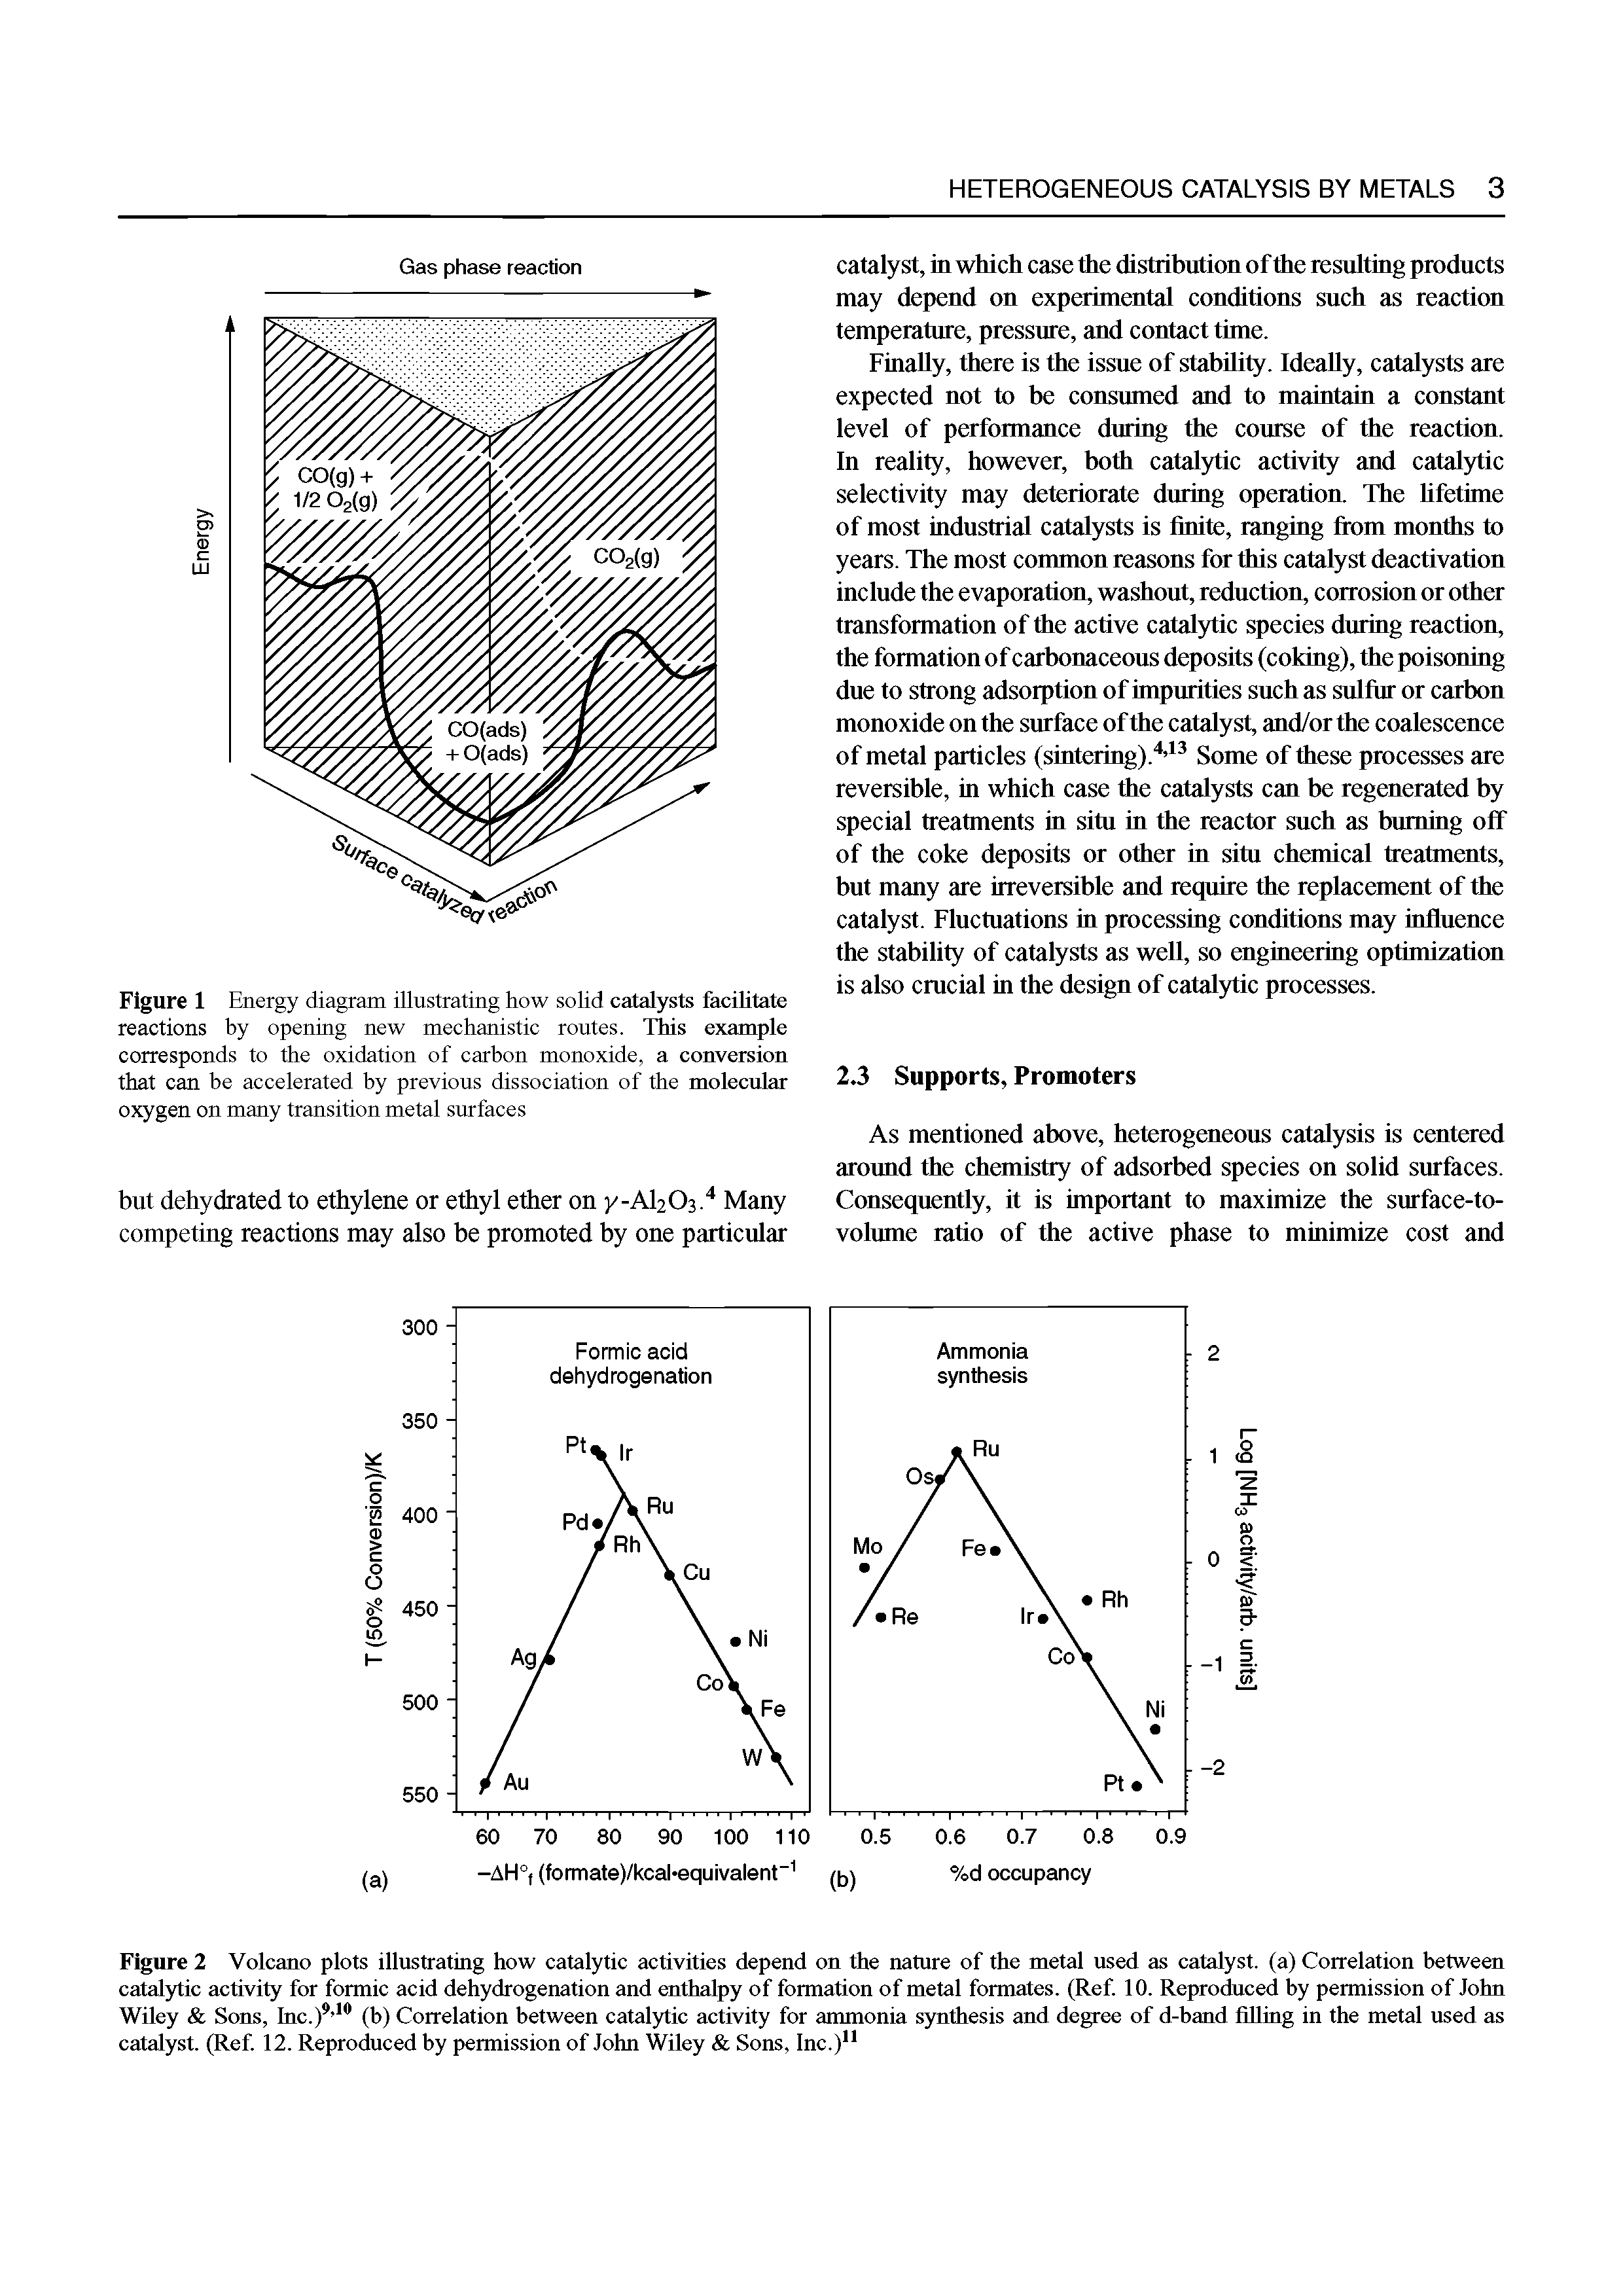 Figure 2 Volcano plots illustrating how catalytic activities depend on the nature of the metal used as catalyst, (a) Correlation between catal)hic activity for formic acid dehydrogenation and enthalpy of formation of metal formates. (Ref 10. Reproduced by permission of John Wiley Sons, Inc.) (b) Correlation between catal)hic activity for ammonia synthesis and degree of d-band fiUing in the metal used as catalyst. (Ref 12. Reproduced by permission of John Wiley Sons, Inc.) ...